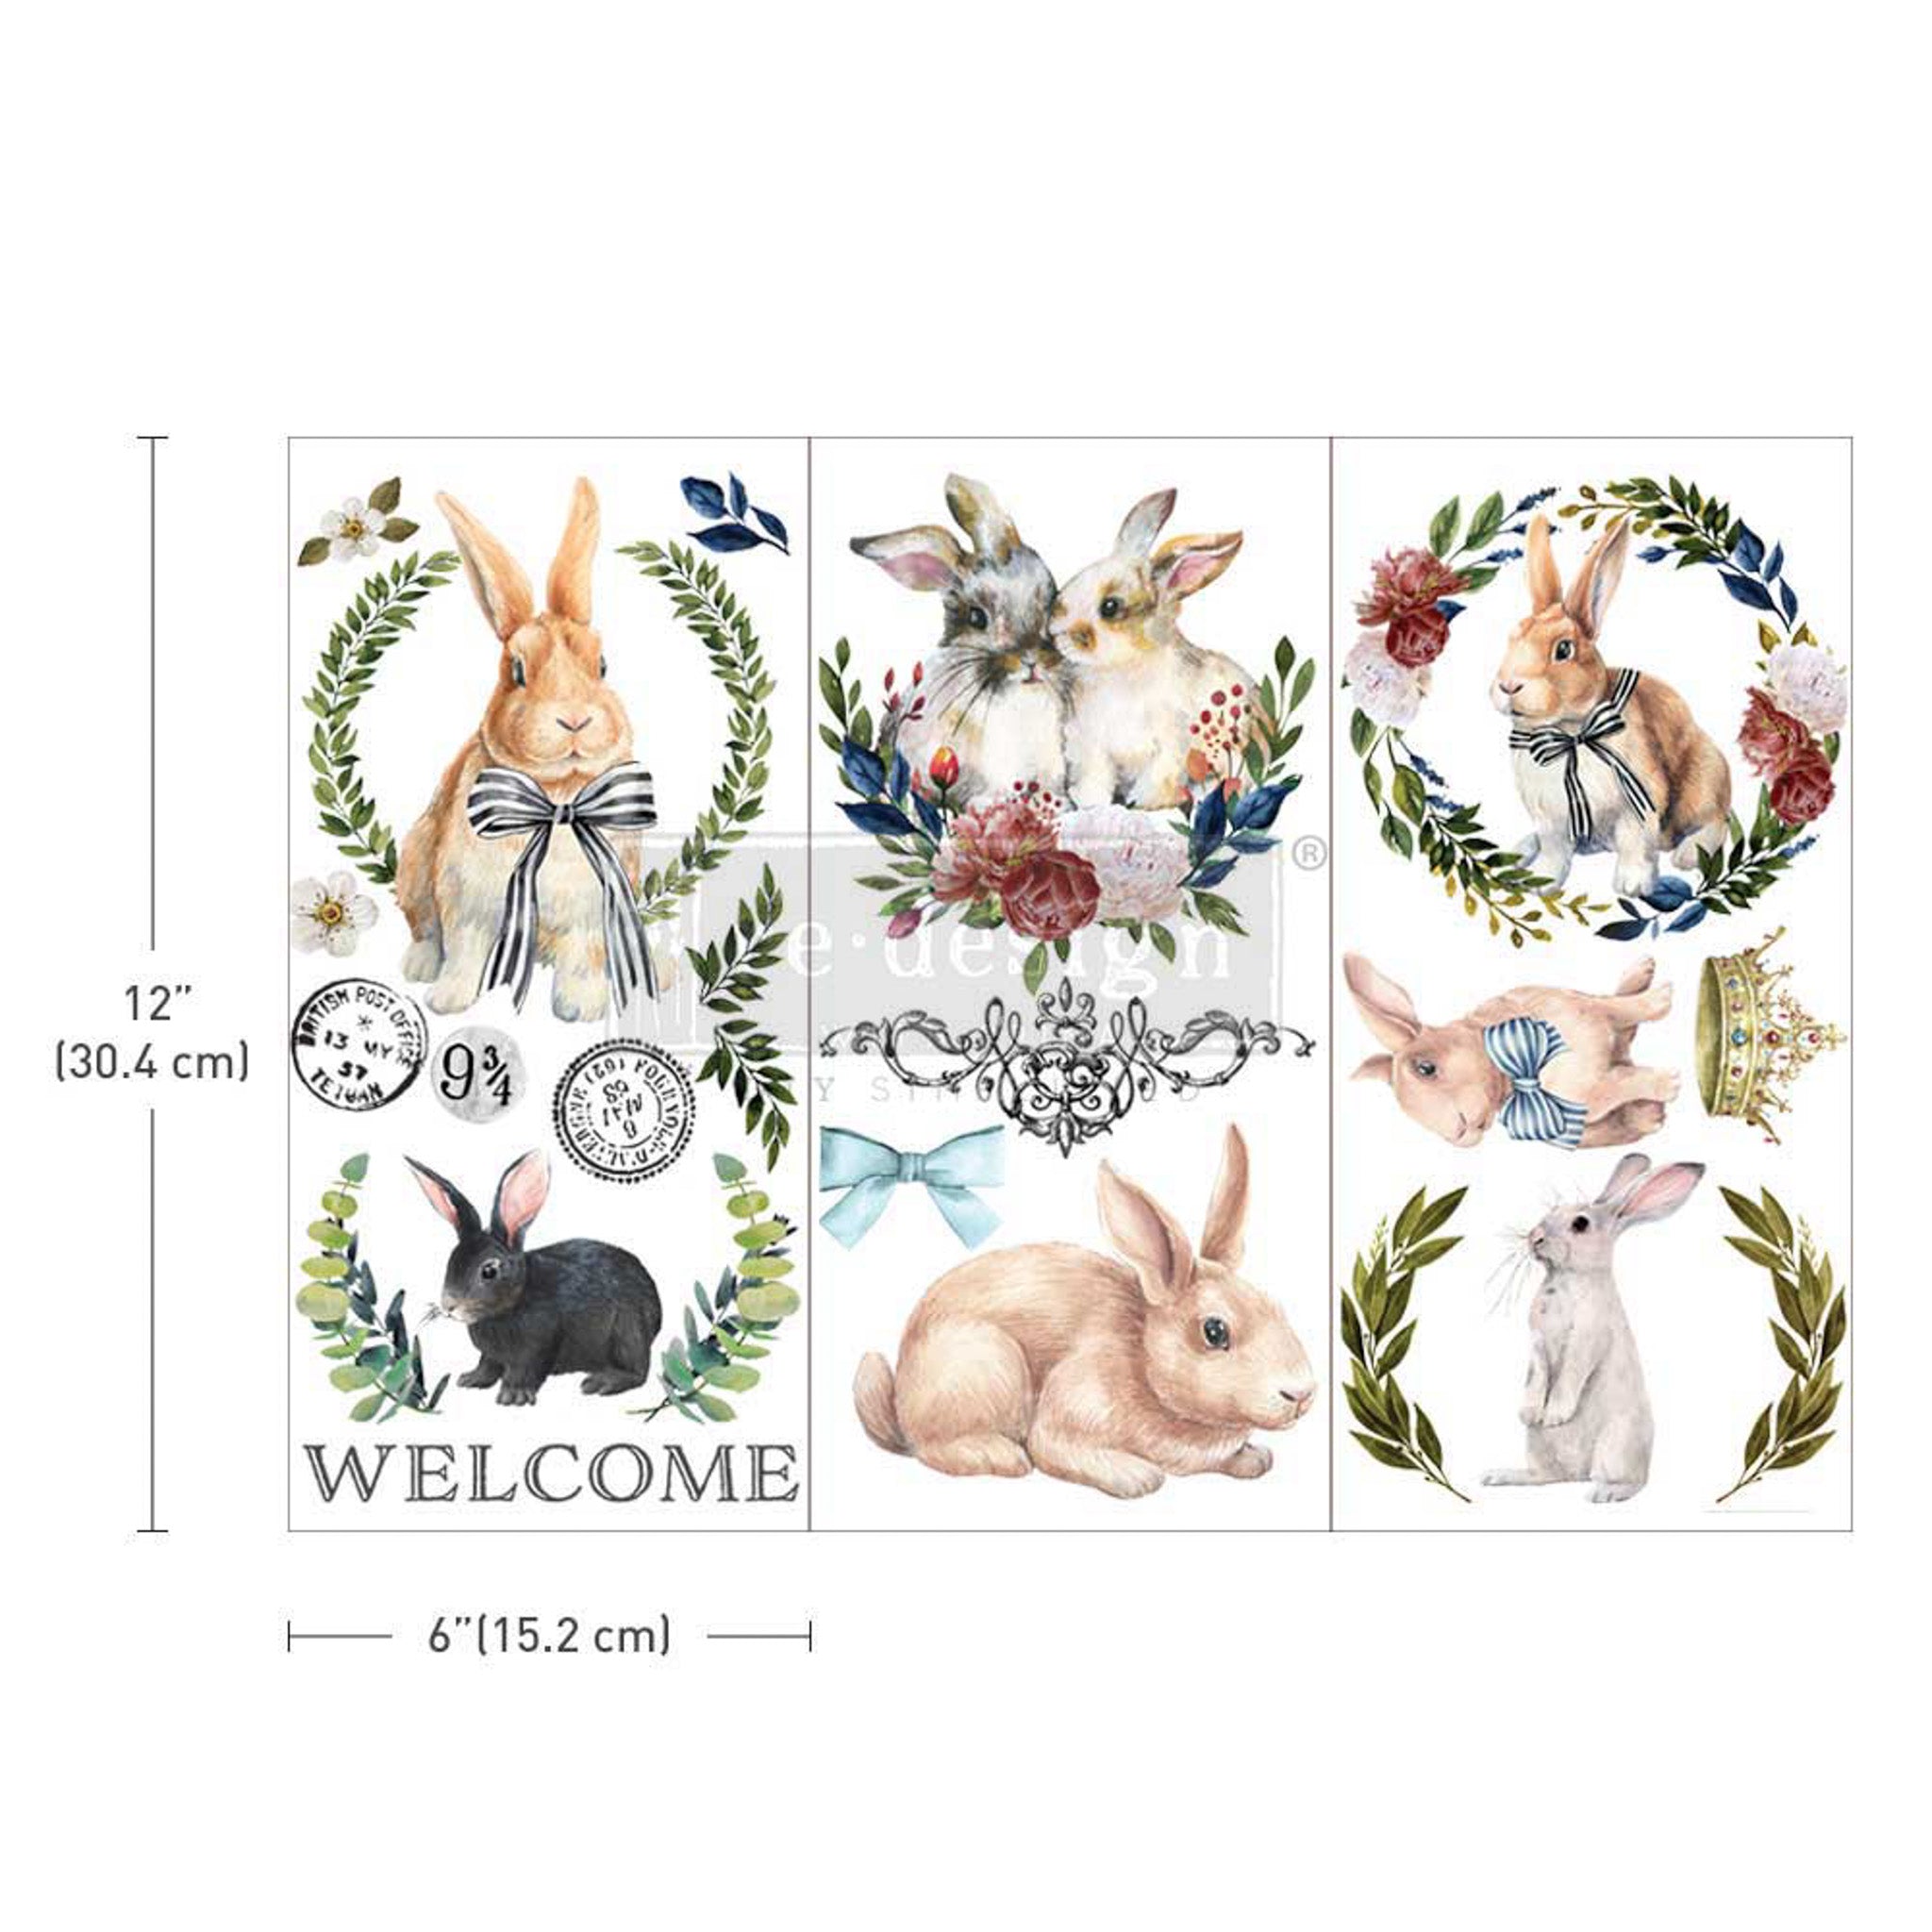 Three sheets of a small rub-on transfer of bunnies and leafy garland wreaths are against a white background. Measurements for 1 sheet reads:  12" [30.4 cm] by 6" [15.2 cm].